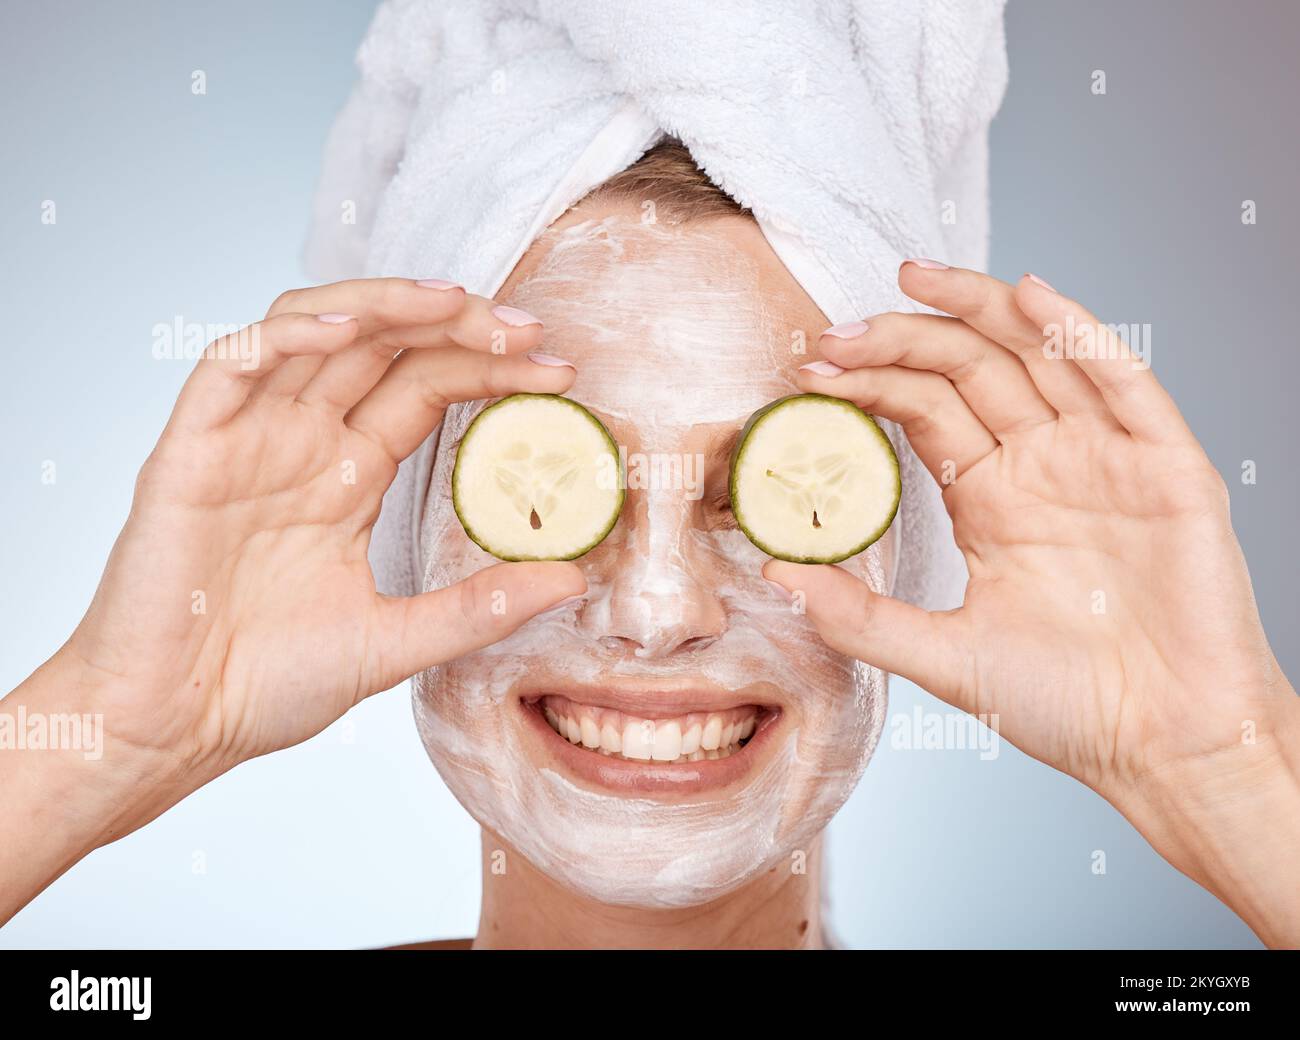 Skincare, facial mask and cucumber for woman, beauty cosmetics and wellness after fresh shower, bathroom morning routine and funny body care. Happy Stock Photo